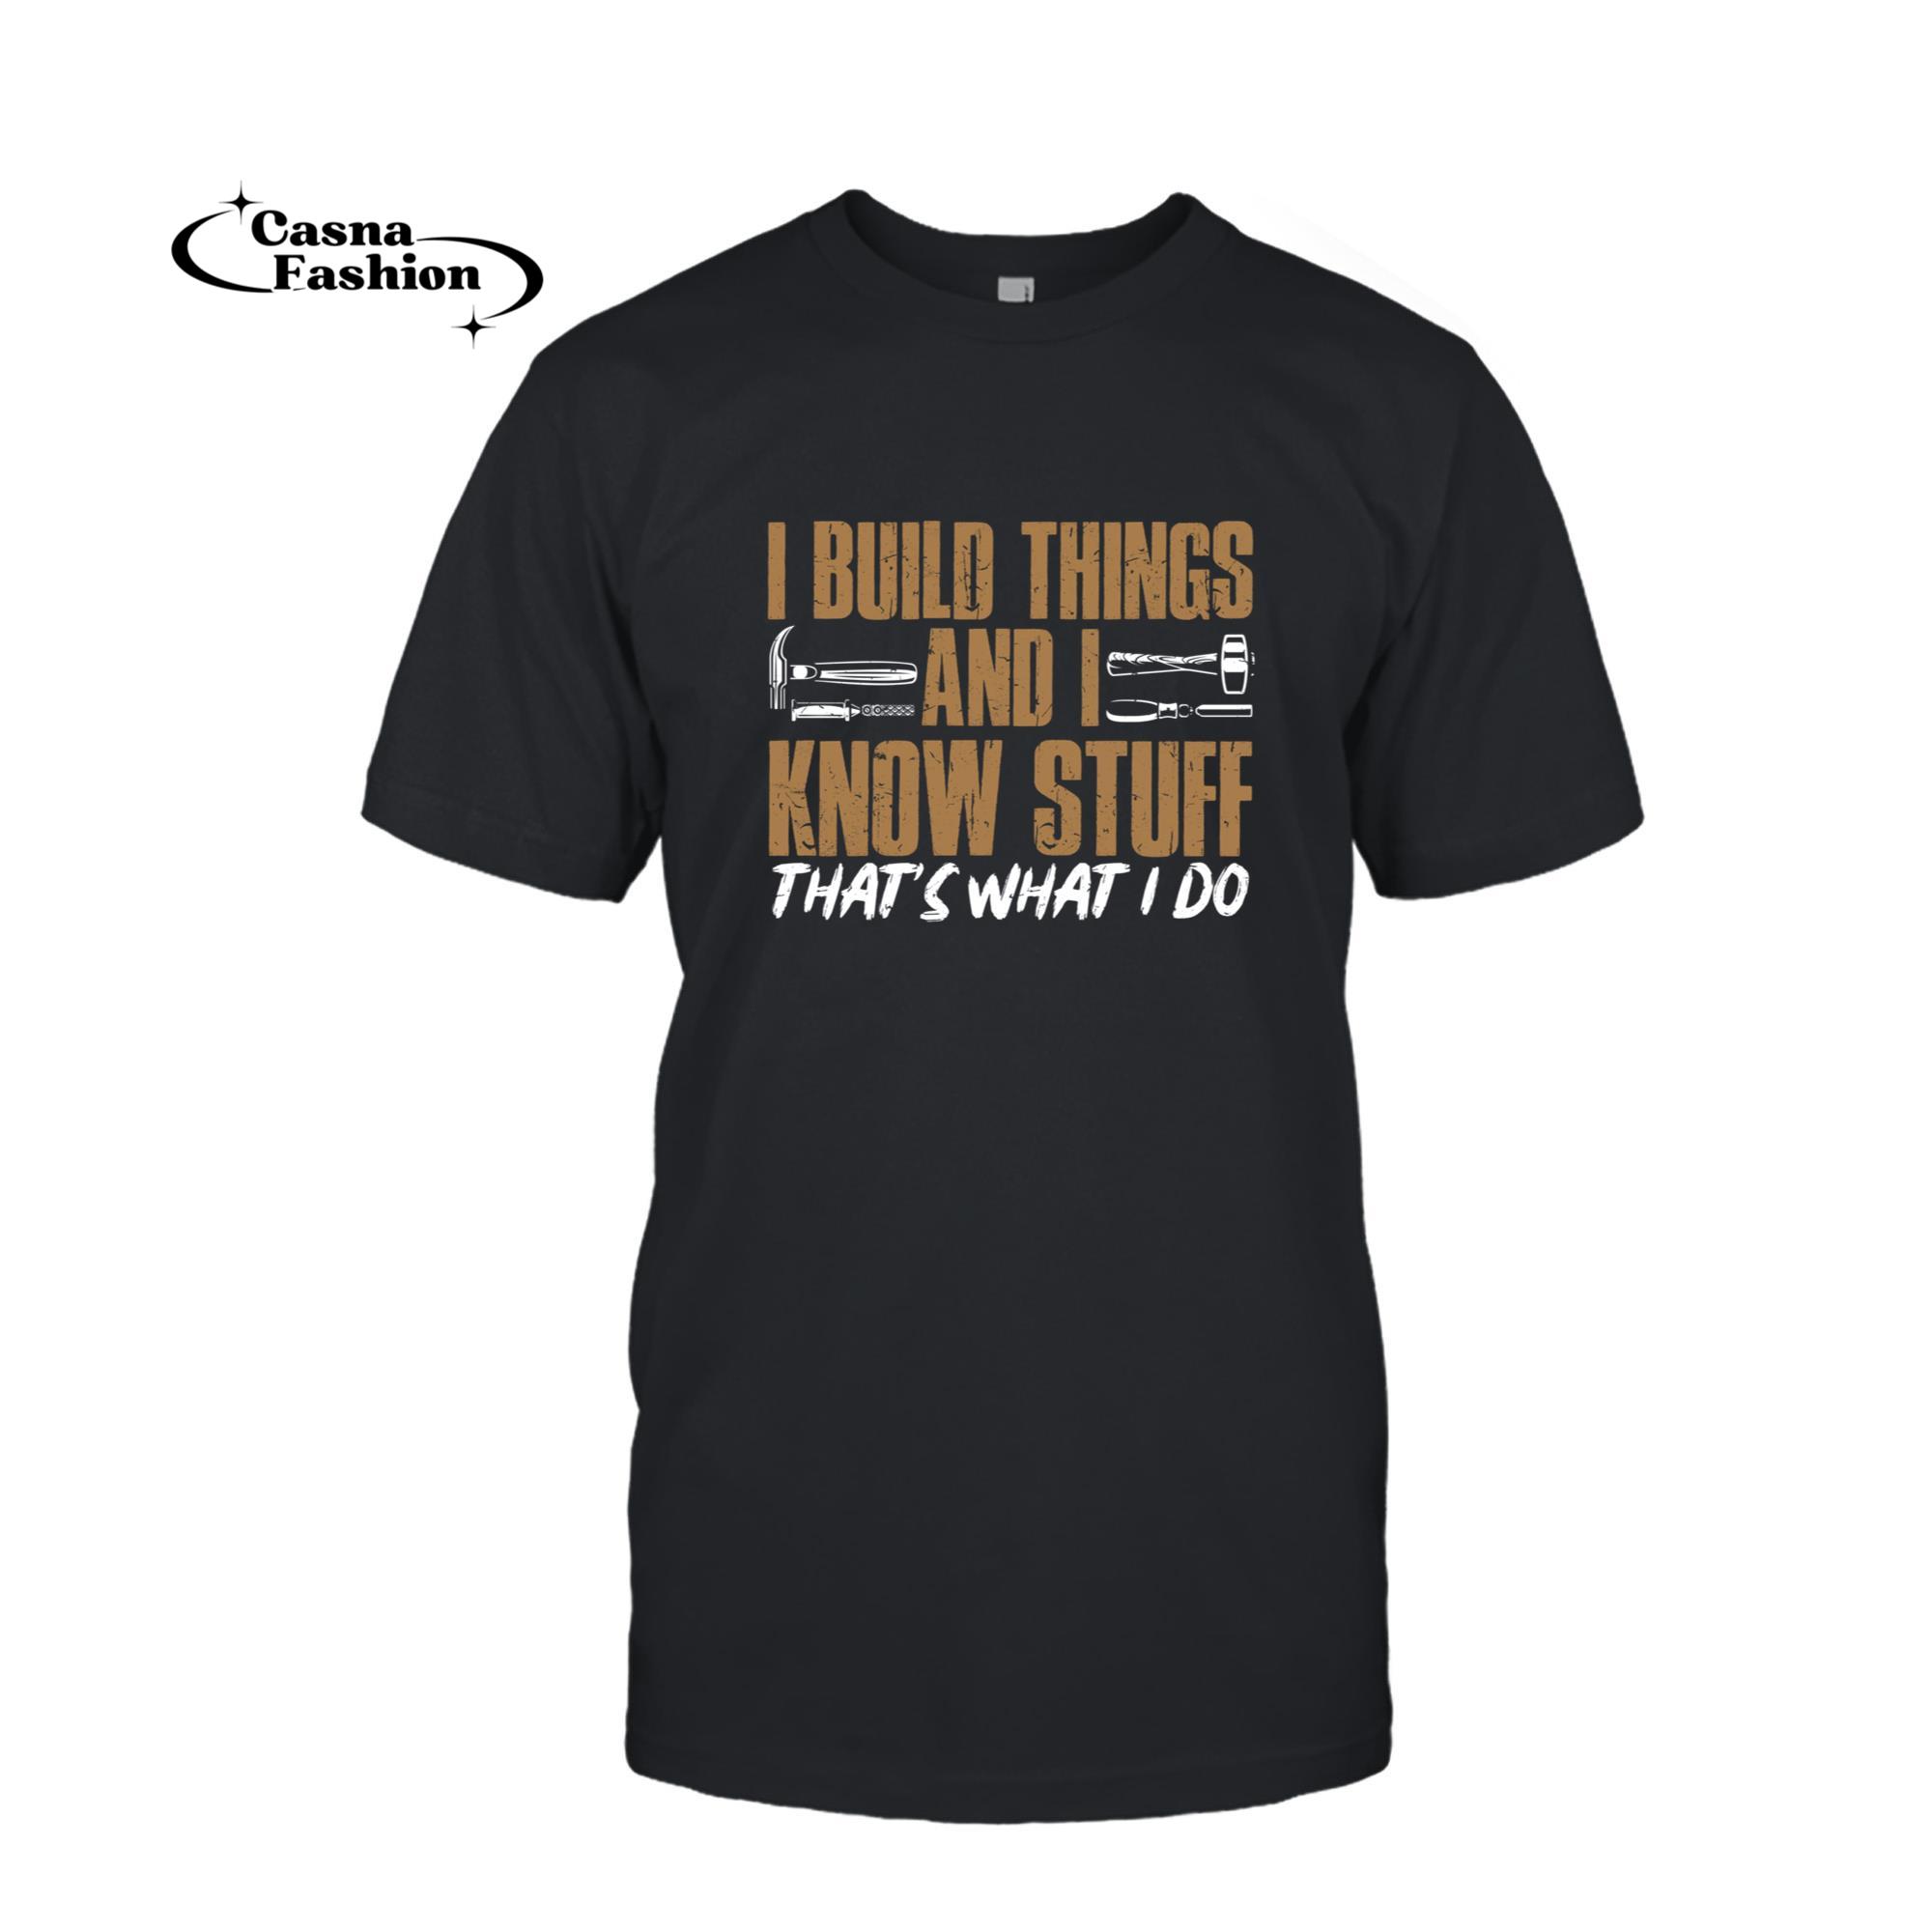 casnafashion_T-shirt_I Build Things And I Know Stuff That's What I Do Pullover Hoodie_T-shirt_Black